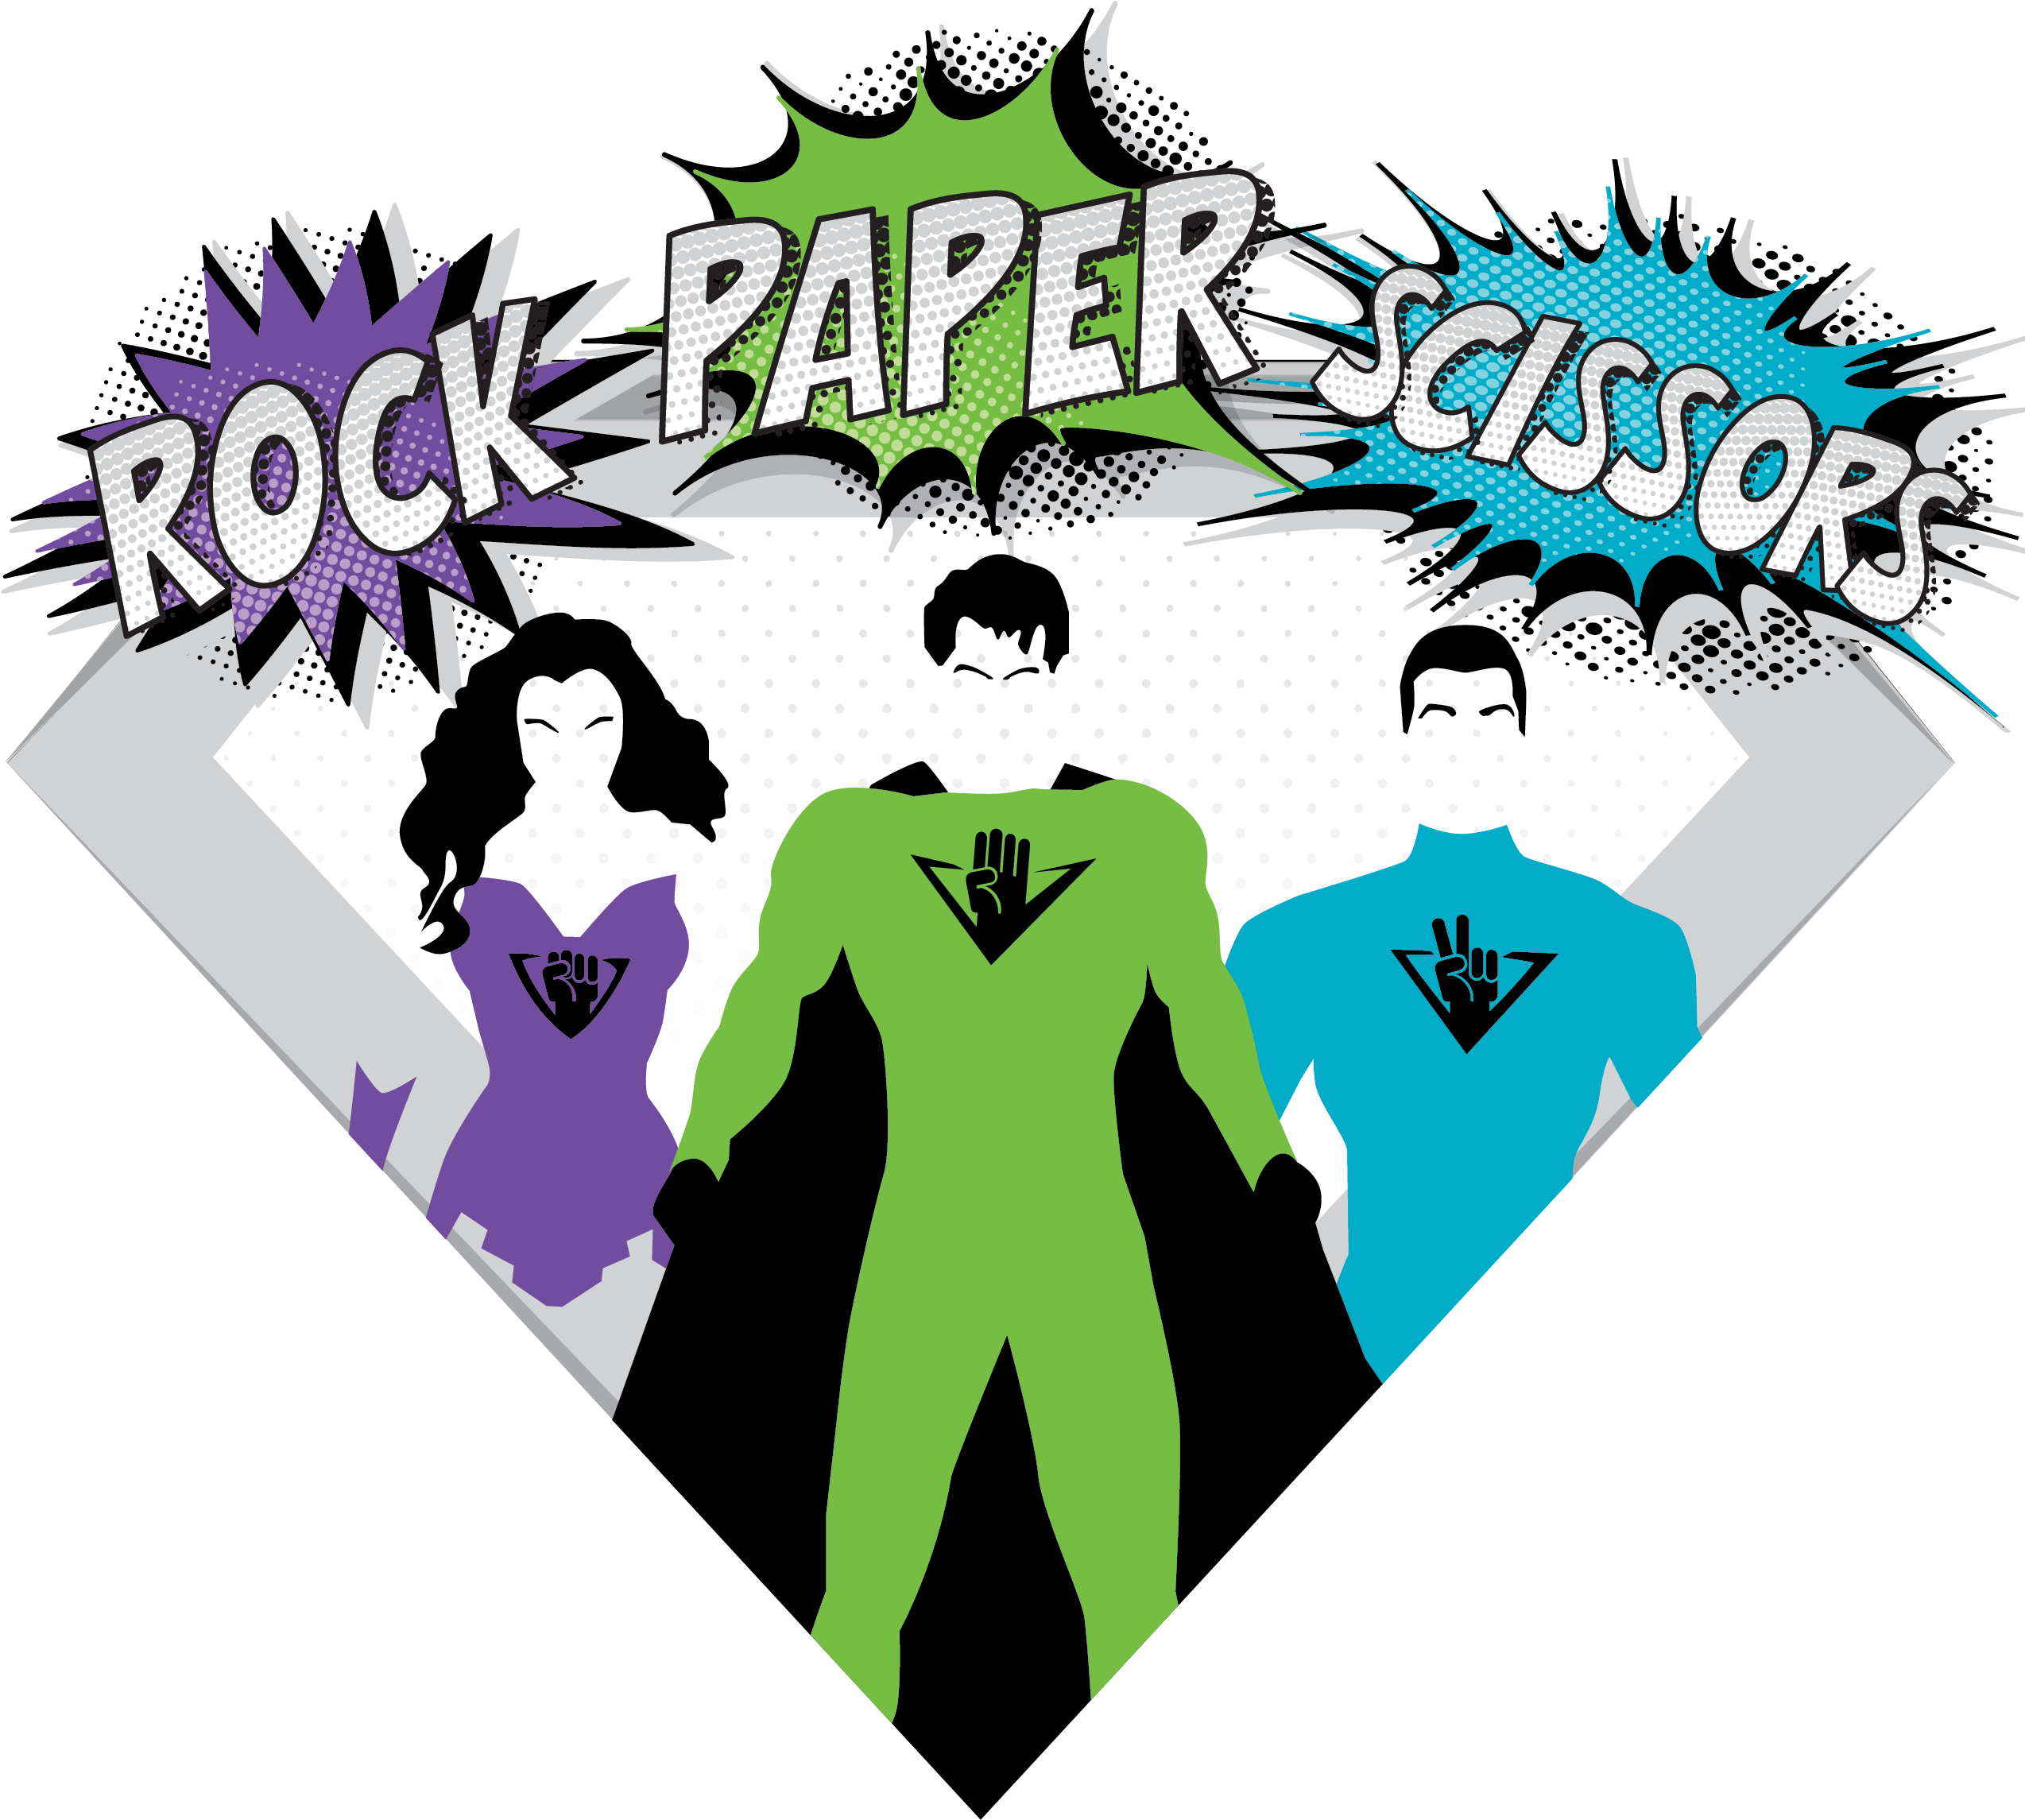 The Triangle Rock Paper Scissors Showdown - Learning Together (2548x2300)